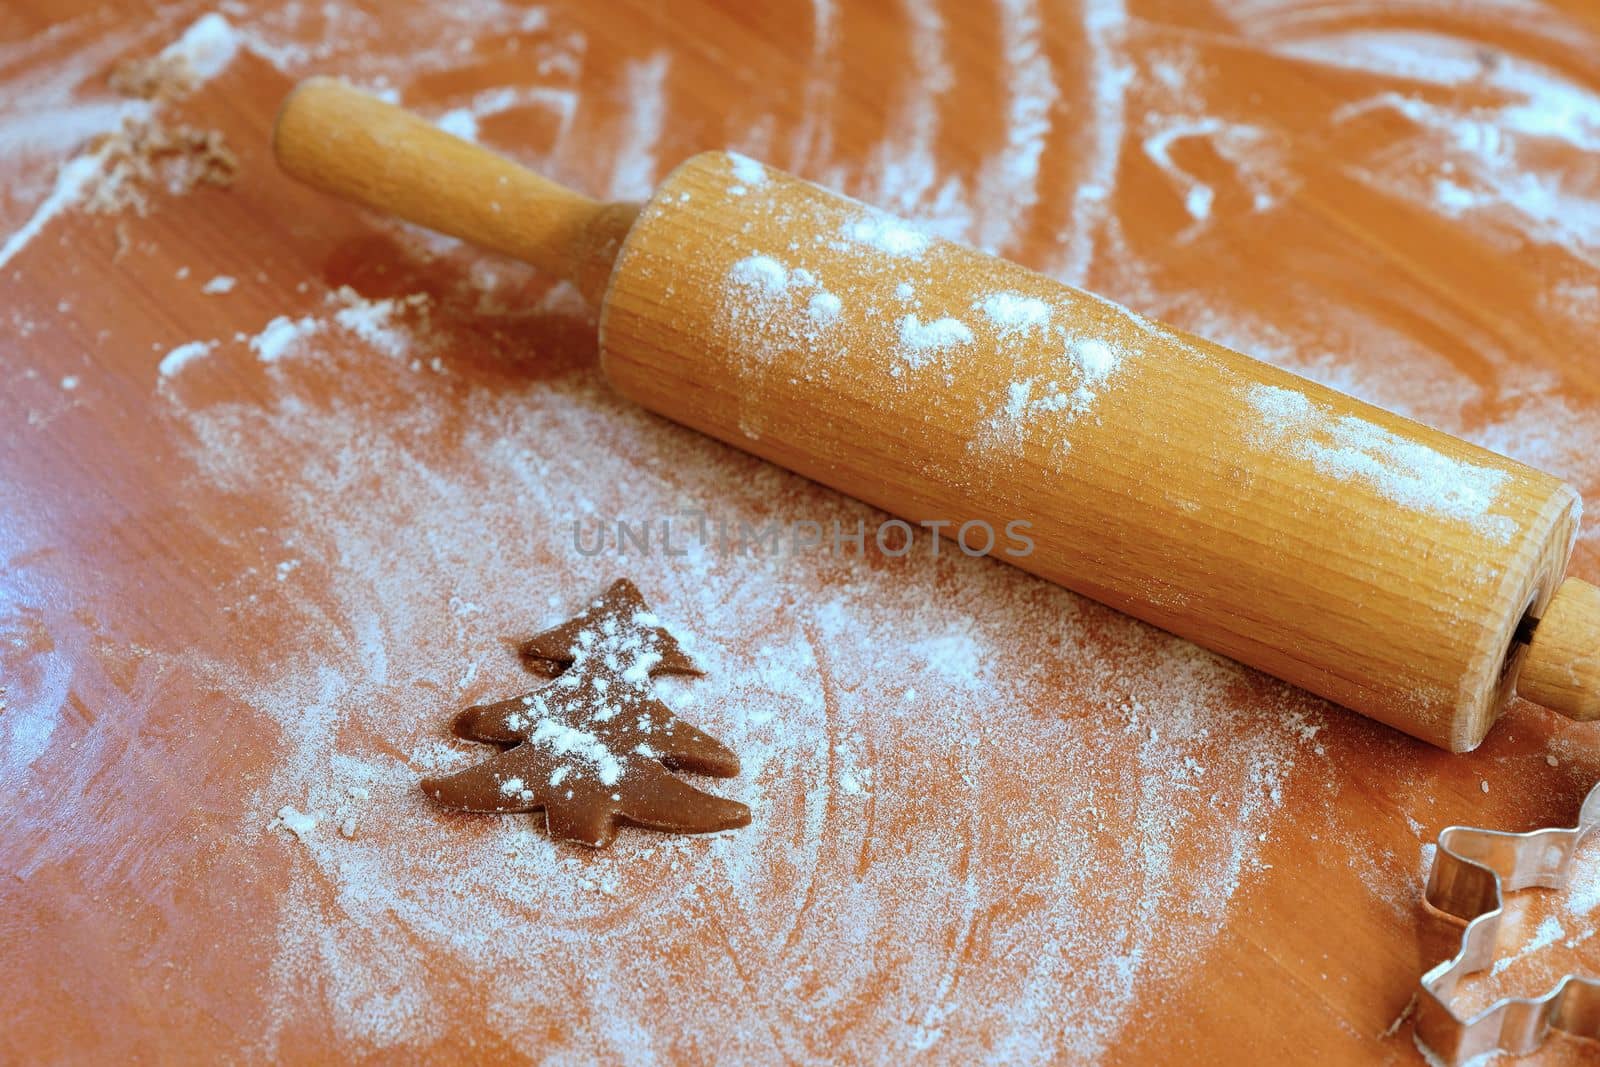 Christmas cookies - gingerbread. Preparation for baking homemade traditional sweets for the Christmas holidays in the Czech Republic.